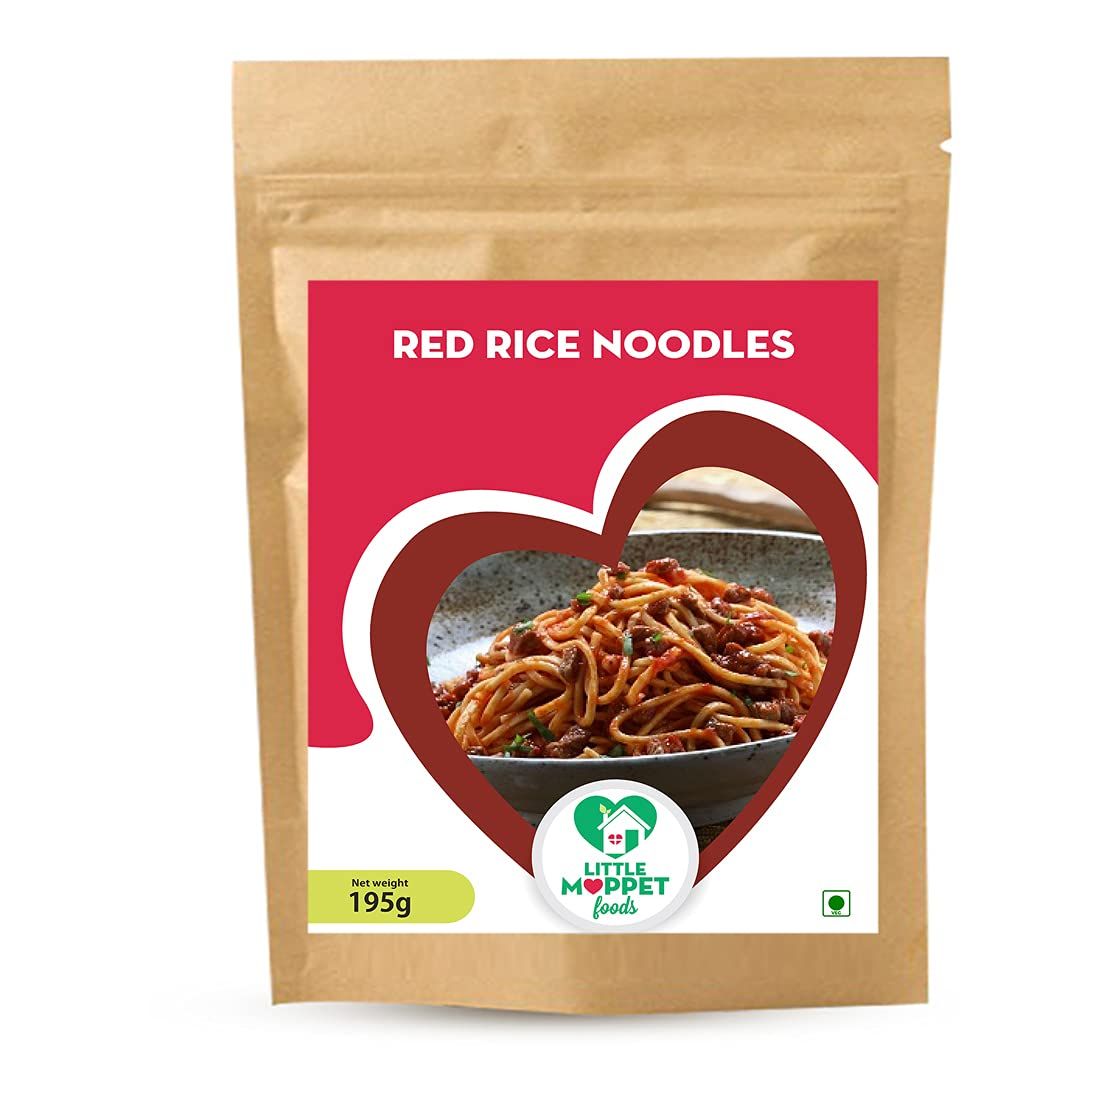 Little Moppet Red Rice Noodles Image